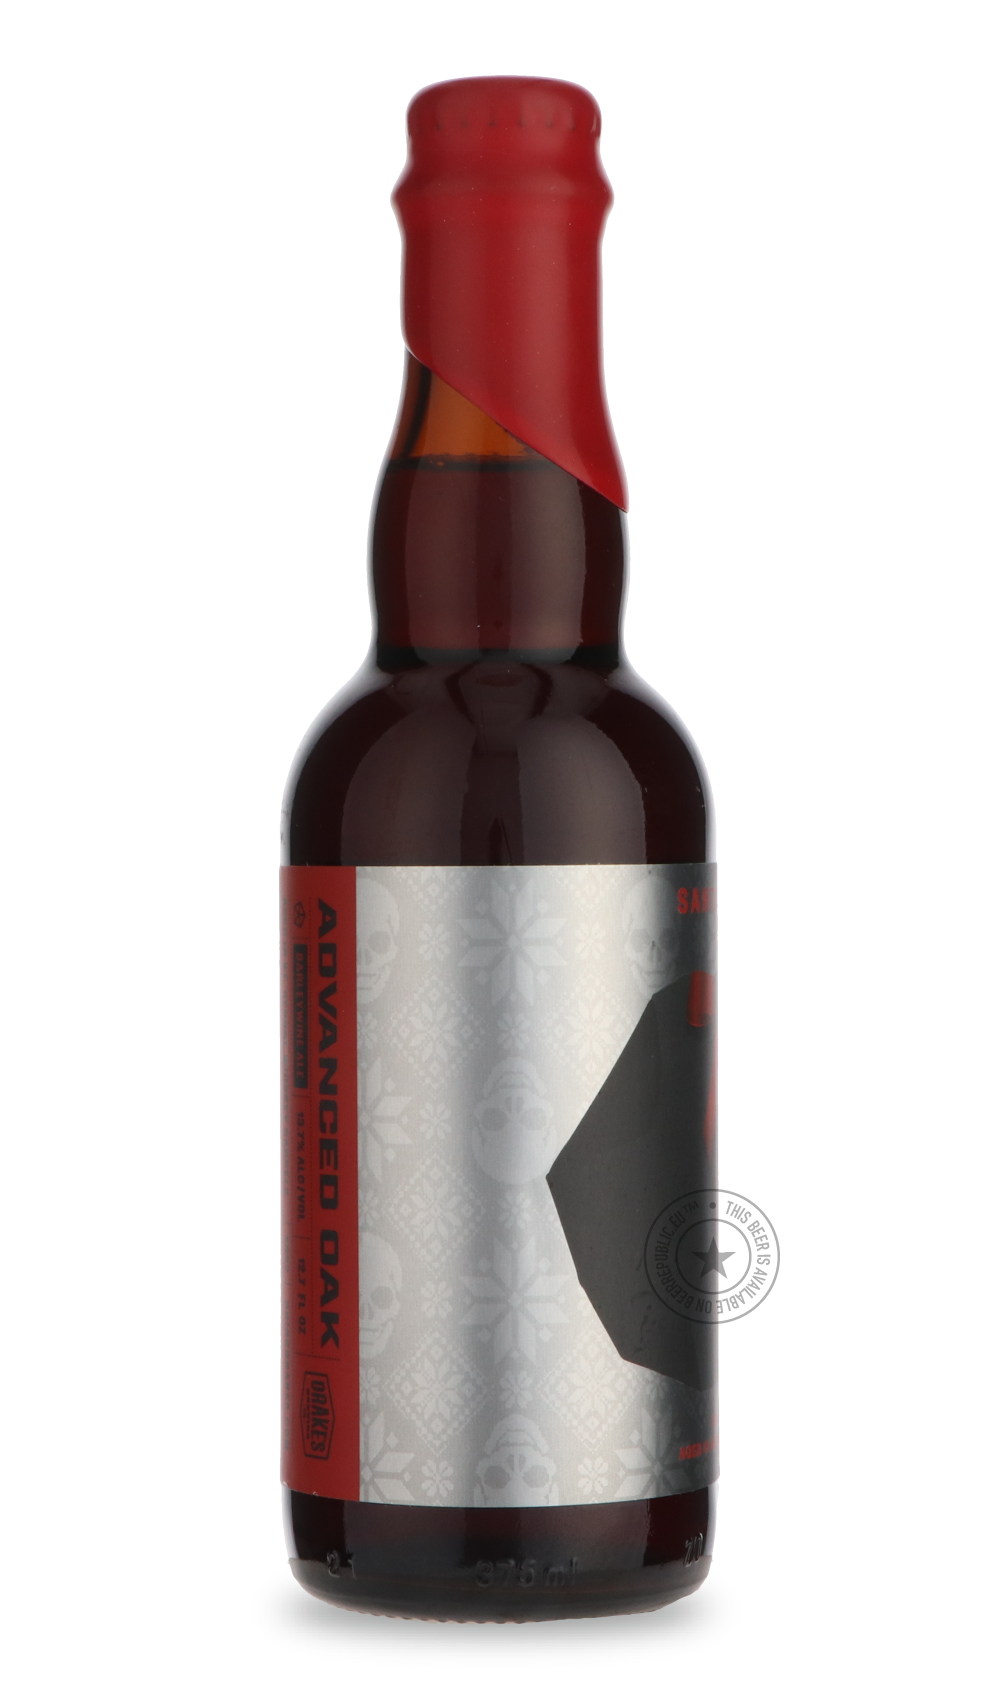 -Drake's- Santas Brass (2022)-Brown & Dark- Only @ Beer Republic - The best online beer store for American & Canadian craft beer - Buy beer online from the USA and Canada - Bier online kopen - Amerikaans bier kopen - Craft beer store - Craft beer kopen - Amerikanisch bier kaufen - Bier online kaufen - Acheter biere online - IPA - Stout - Porter - New England IPA - Hazy IPA - Imperial Stout - Barrel Aged - Barrel Aged Imperial Stout - Brown - Dark beer - Blond - Blonde - Pilsner - Lager - Wheat - Weizen - Am